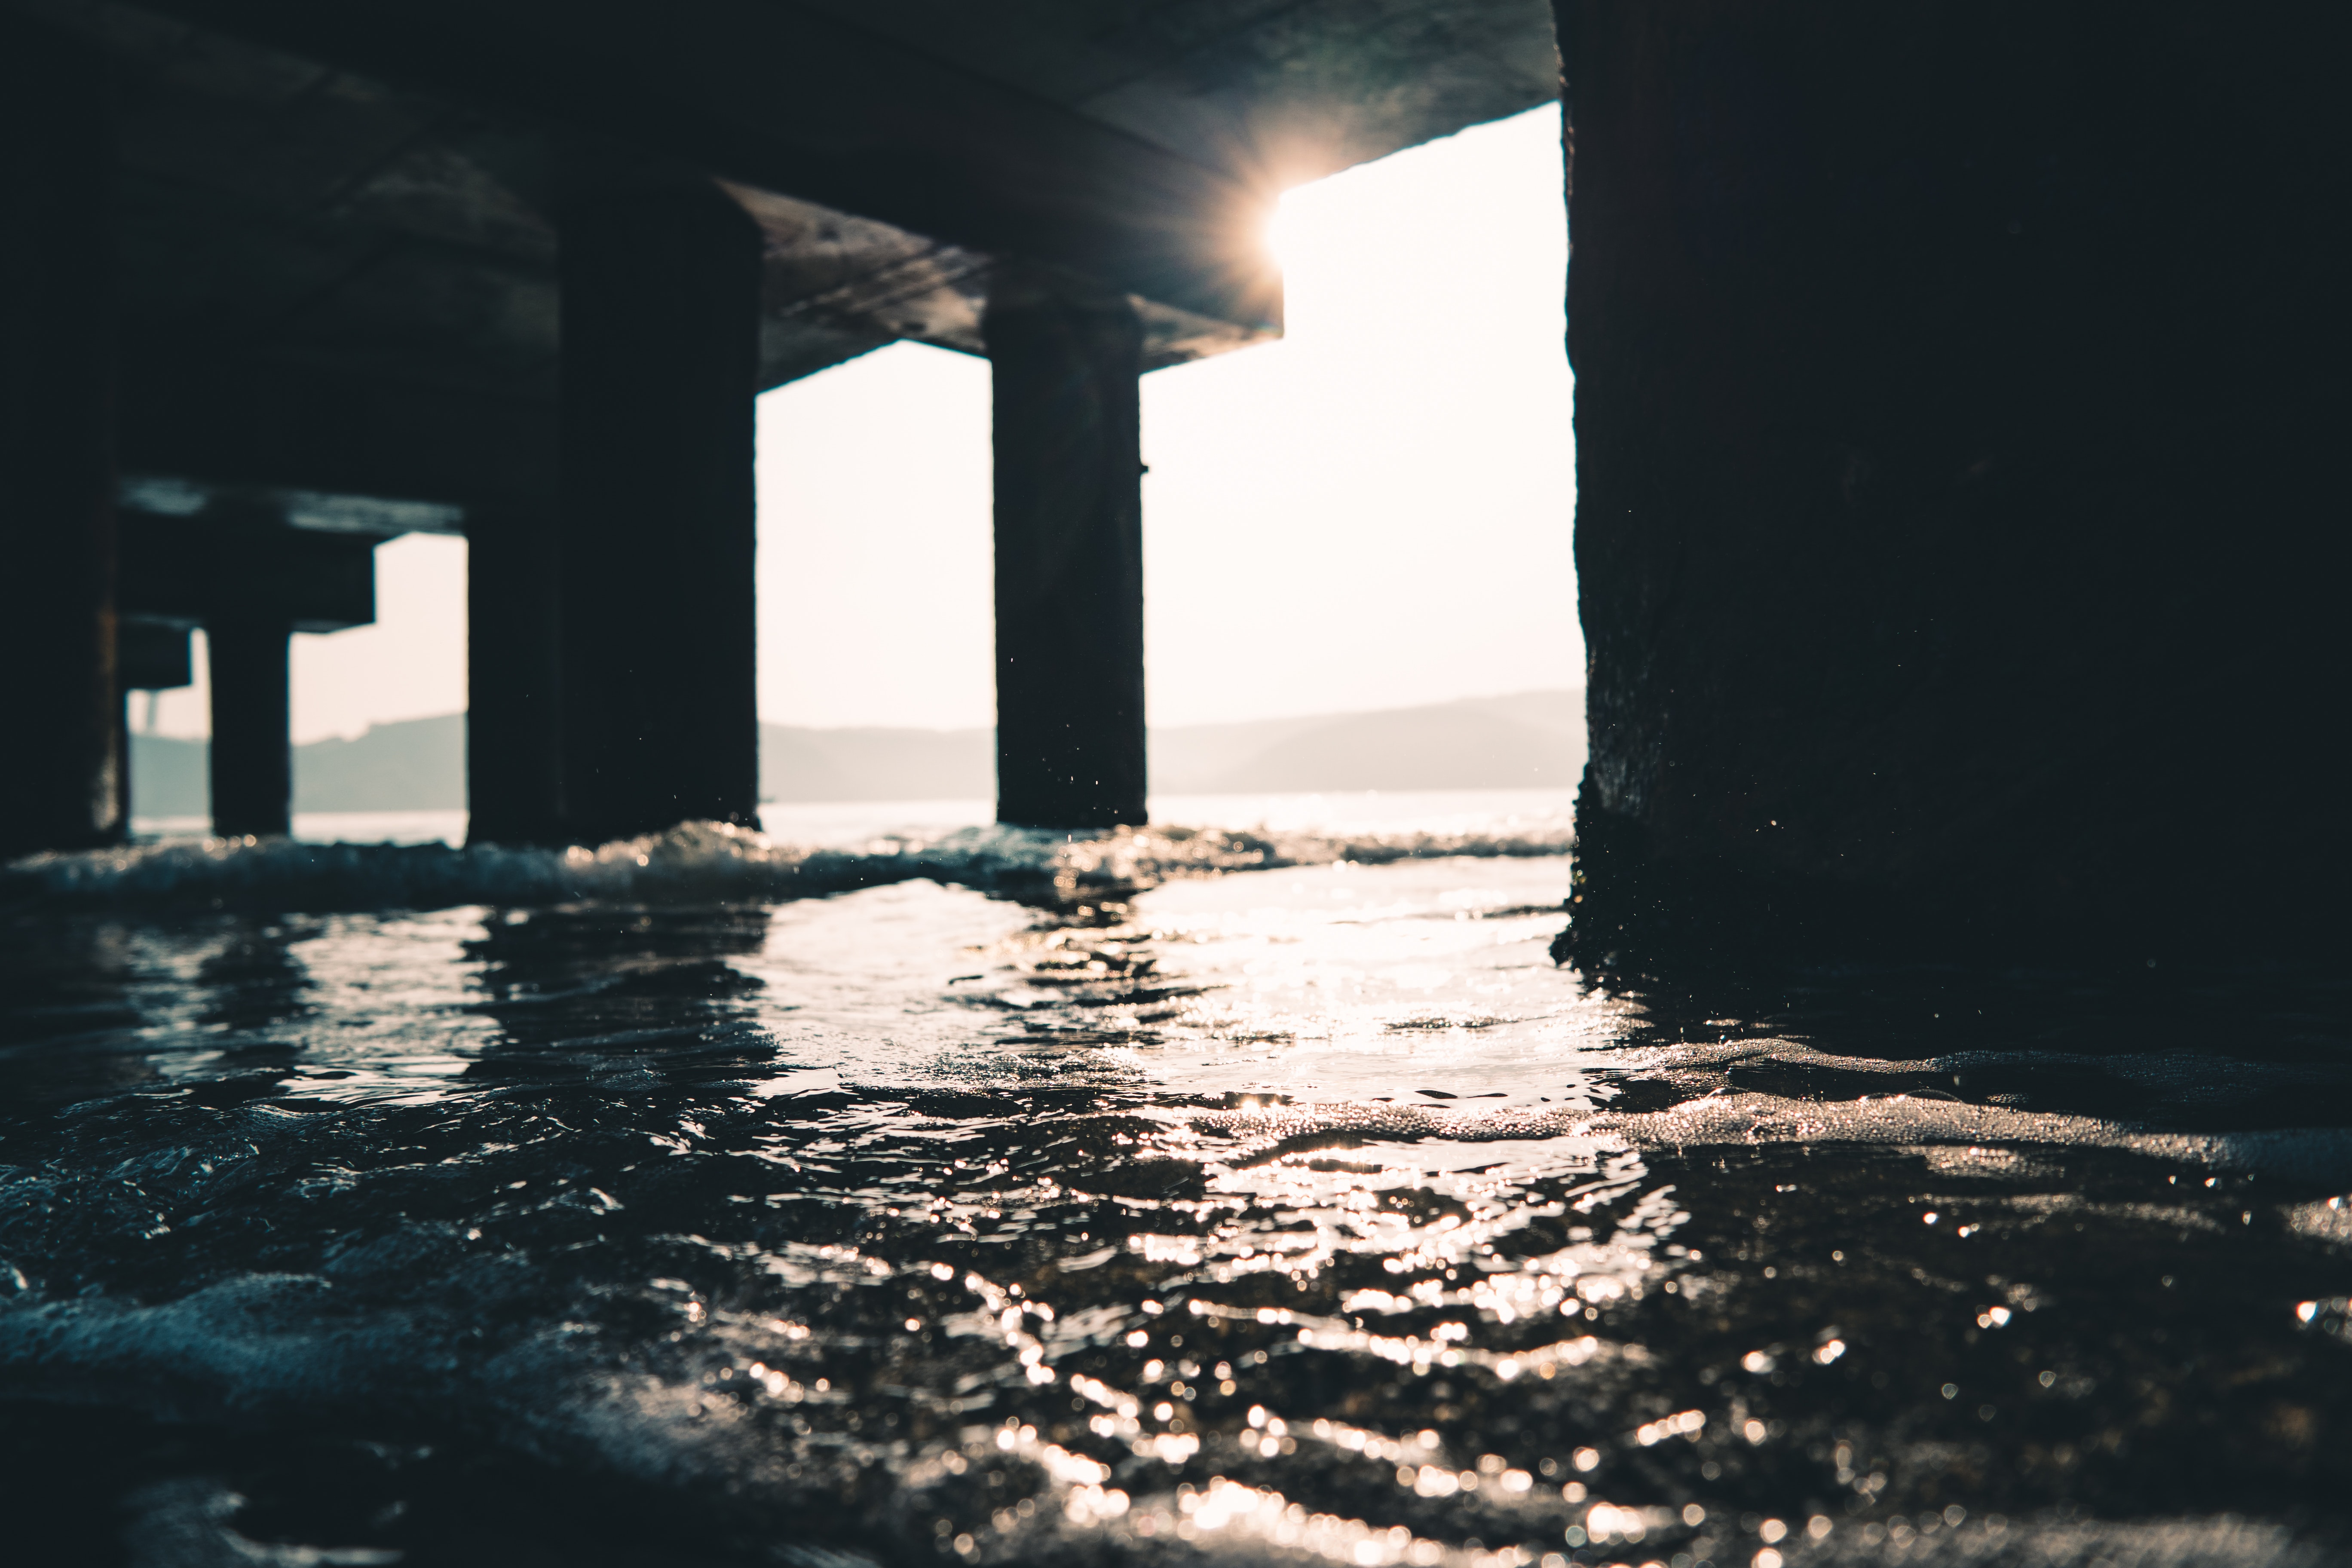 Photography of sea water under the dock